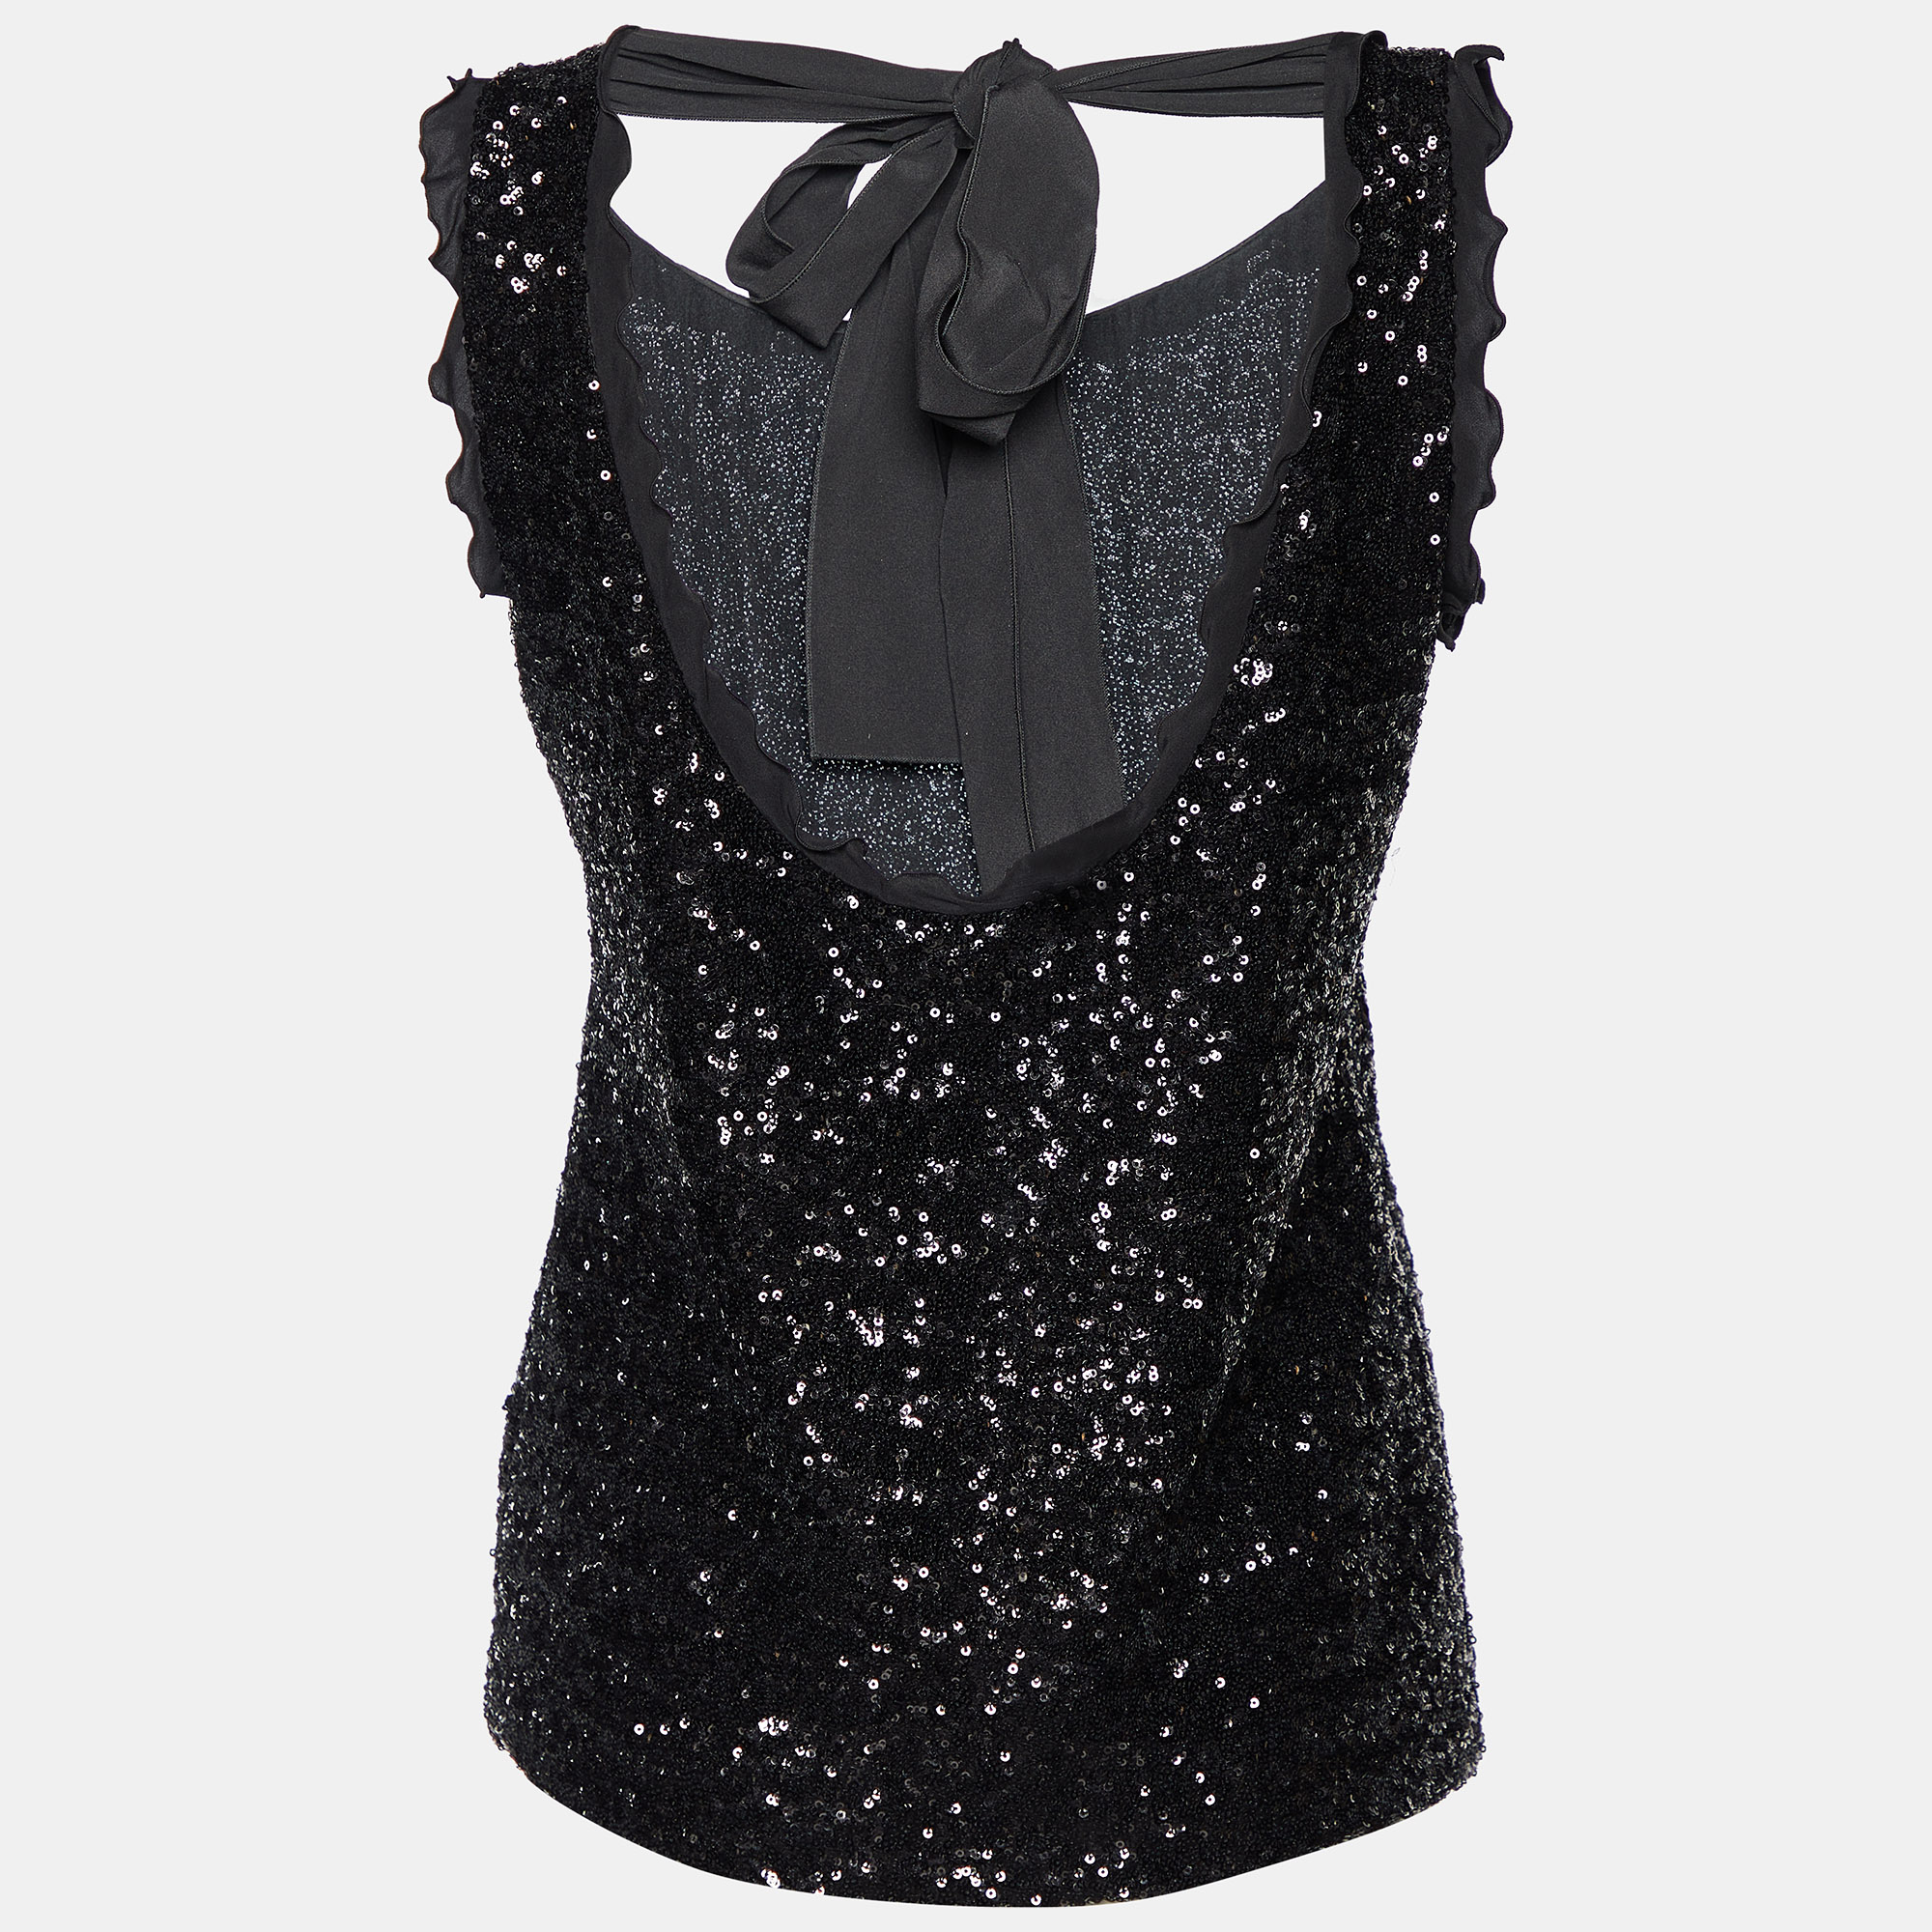 

Moschino Cheap and Chic Black Sequined Ruffle Trim Tie Detail Sleeveless Top